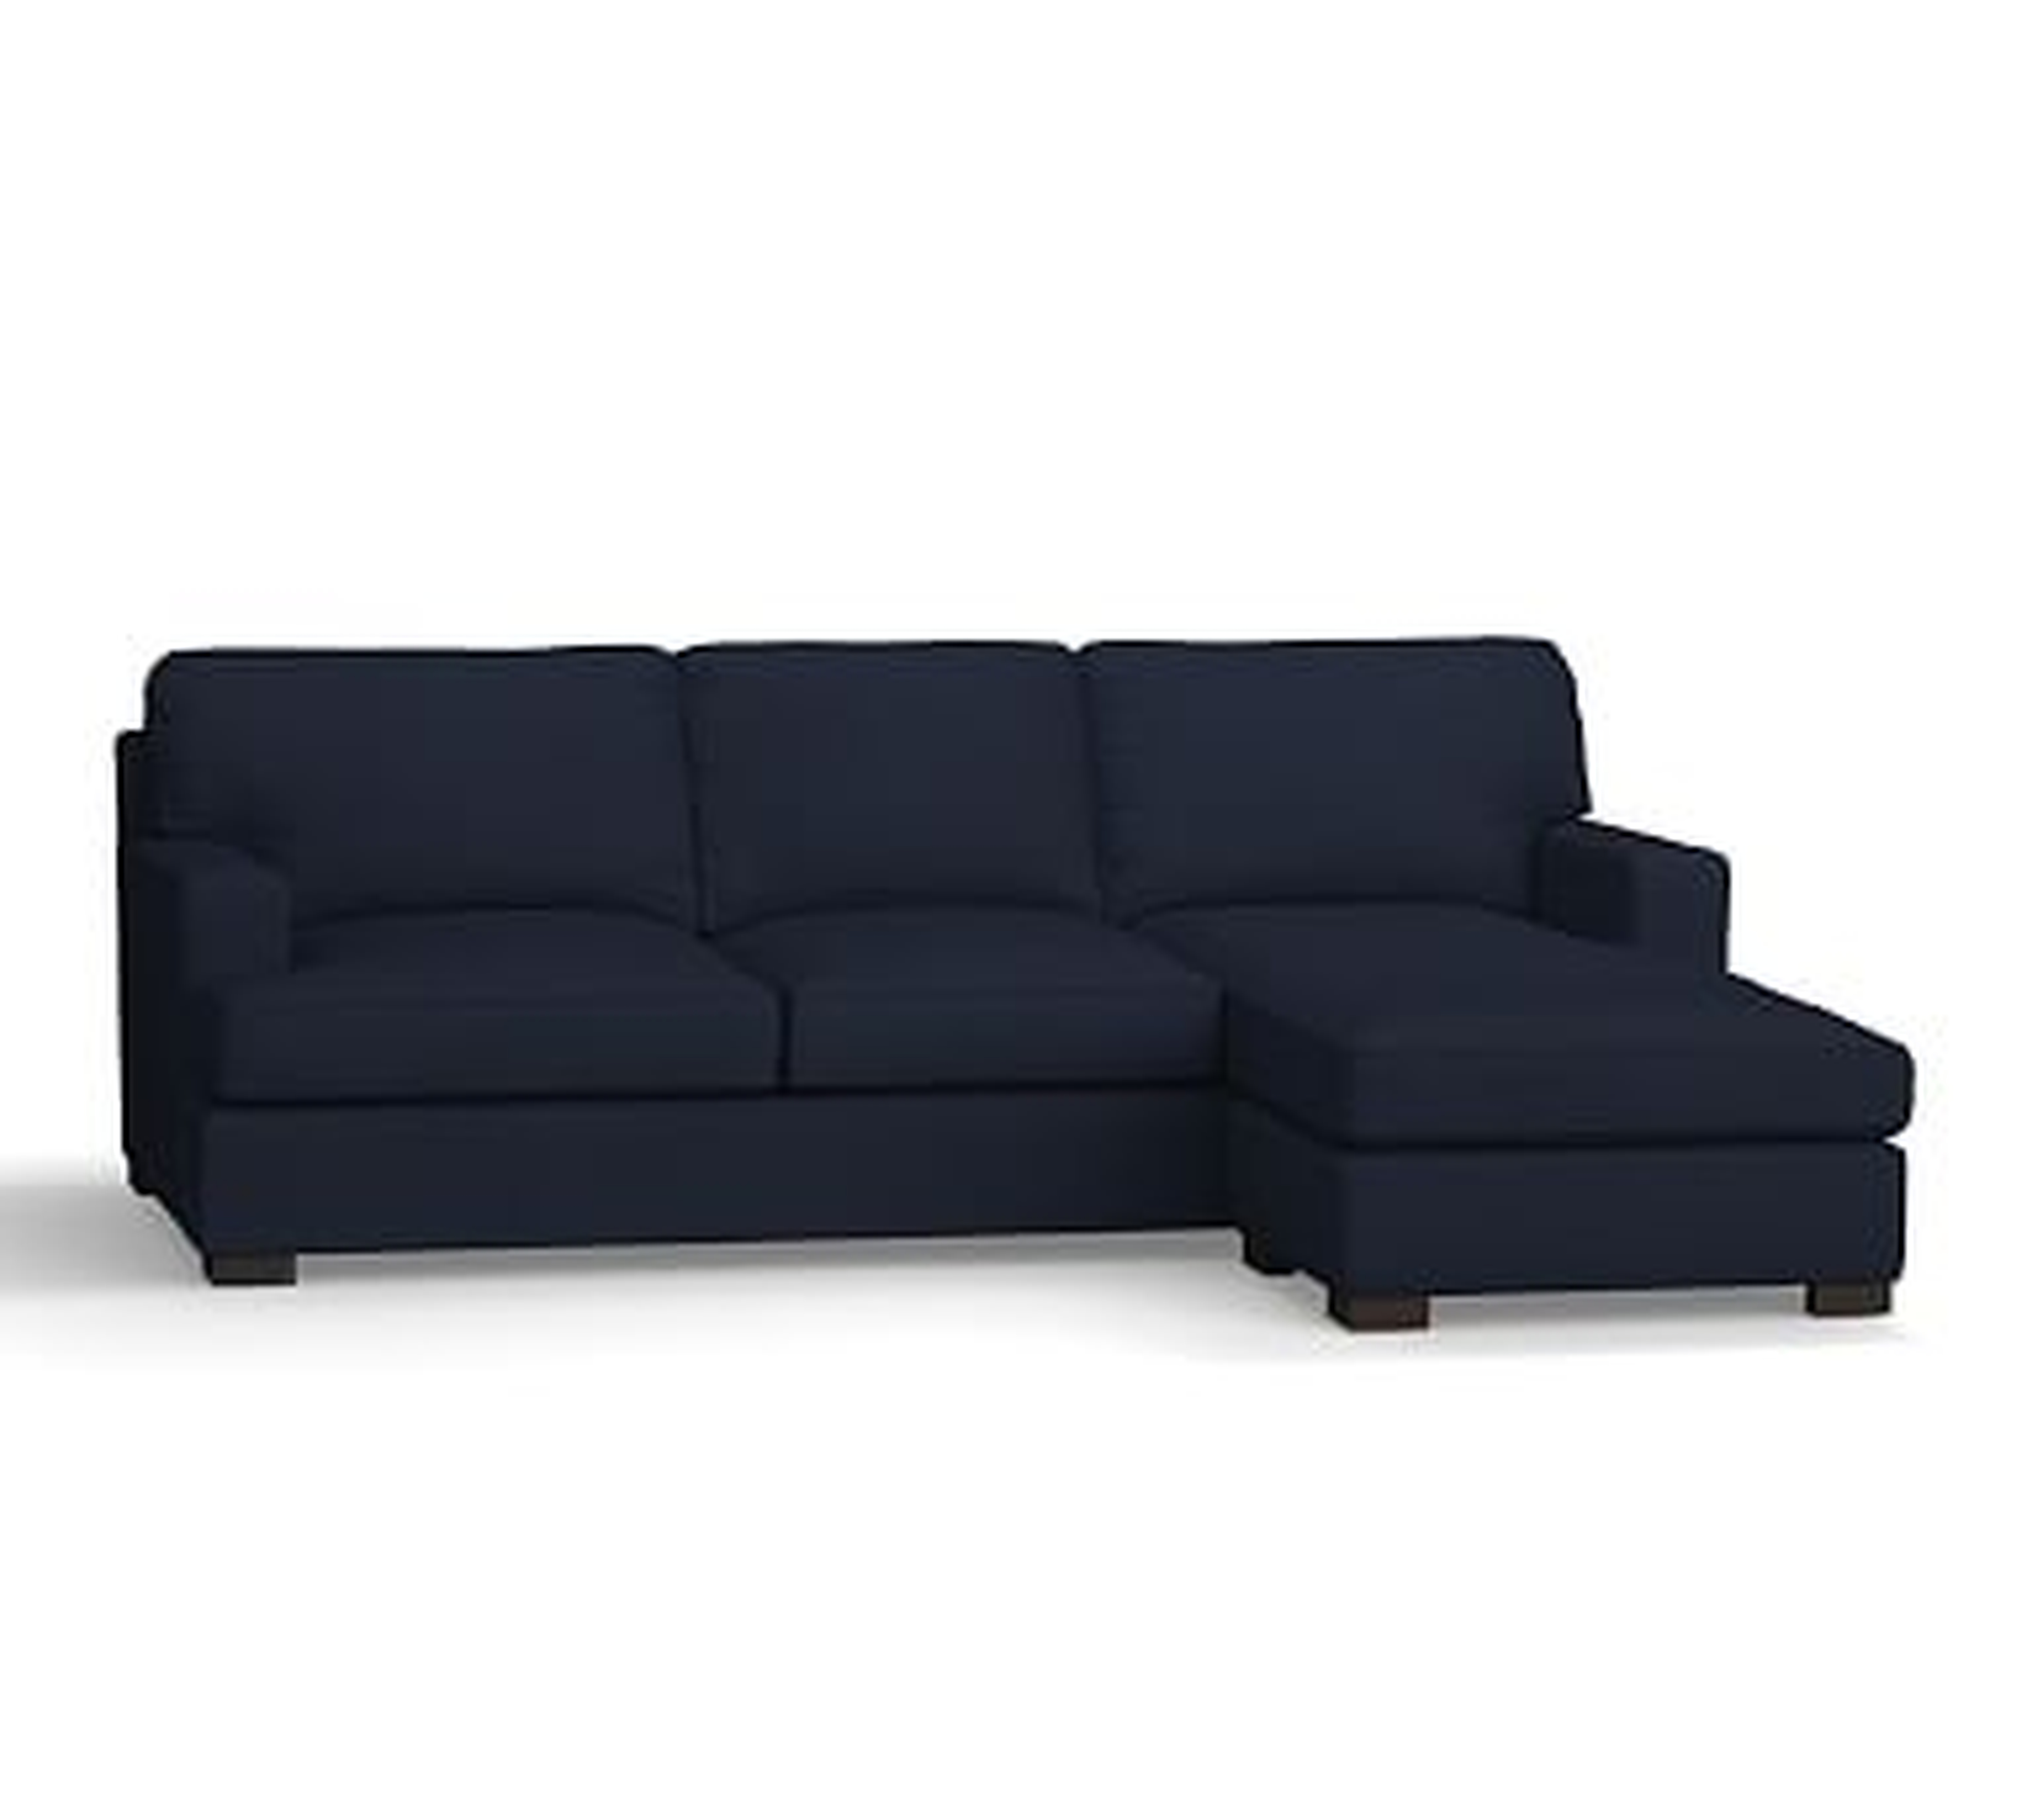 Townsend Square Arm Upholstered Sofa with Reversible Storage Chaise Sectional, Polyester Wrapped Cushions, Twill Cadet Navy - Pottery Barn